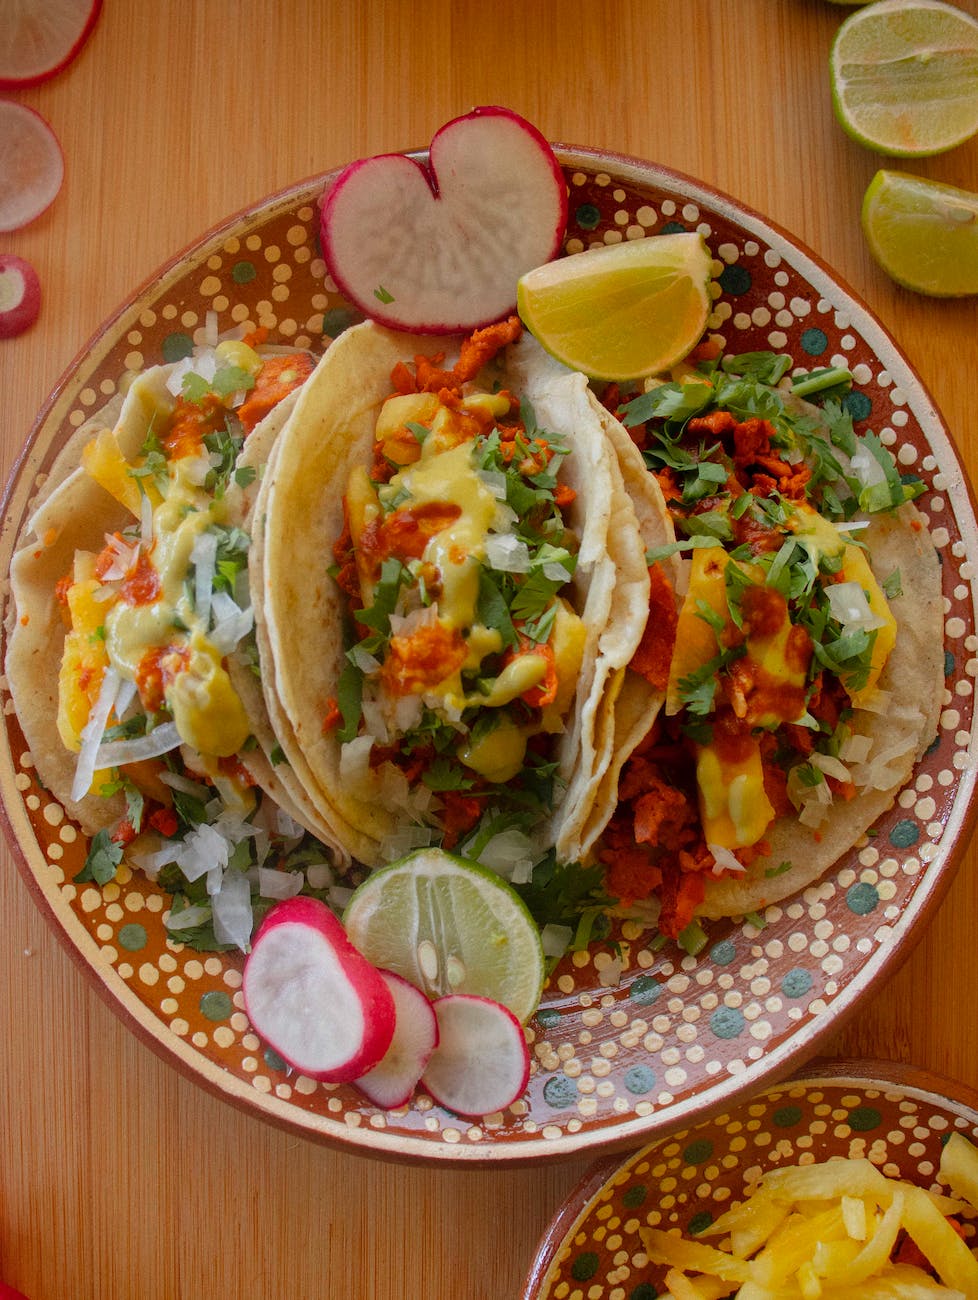 vegan tacos on plate in close up view